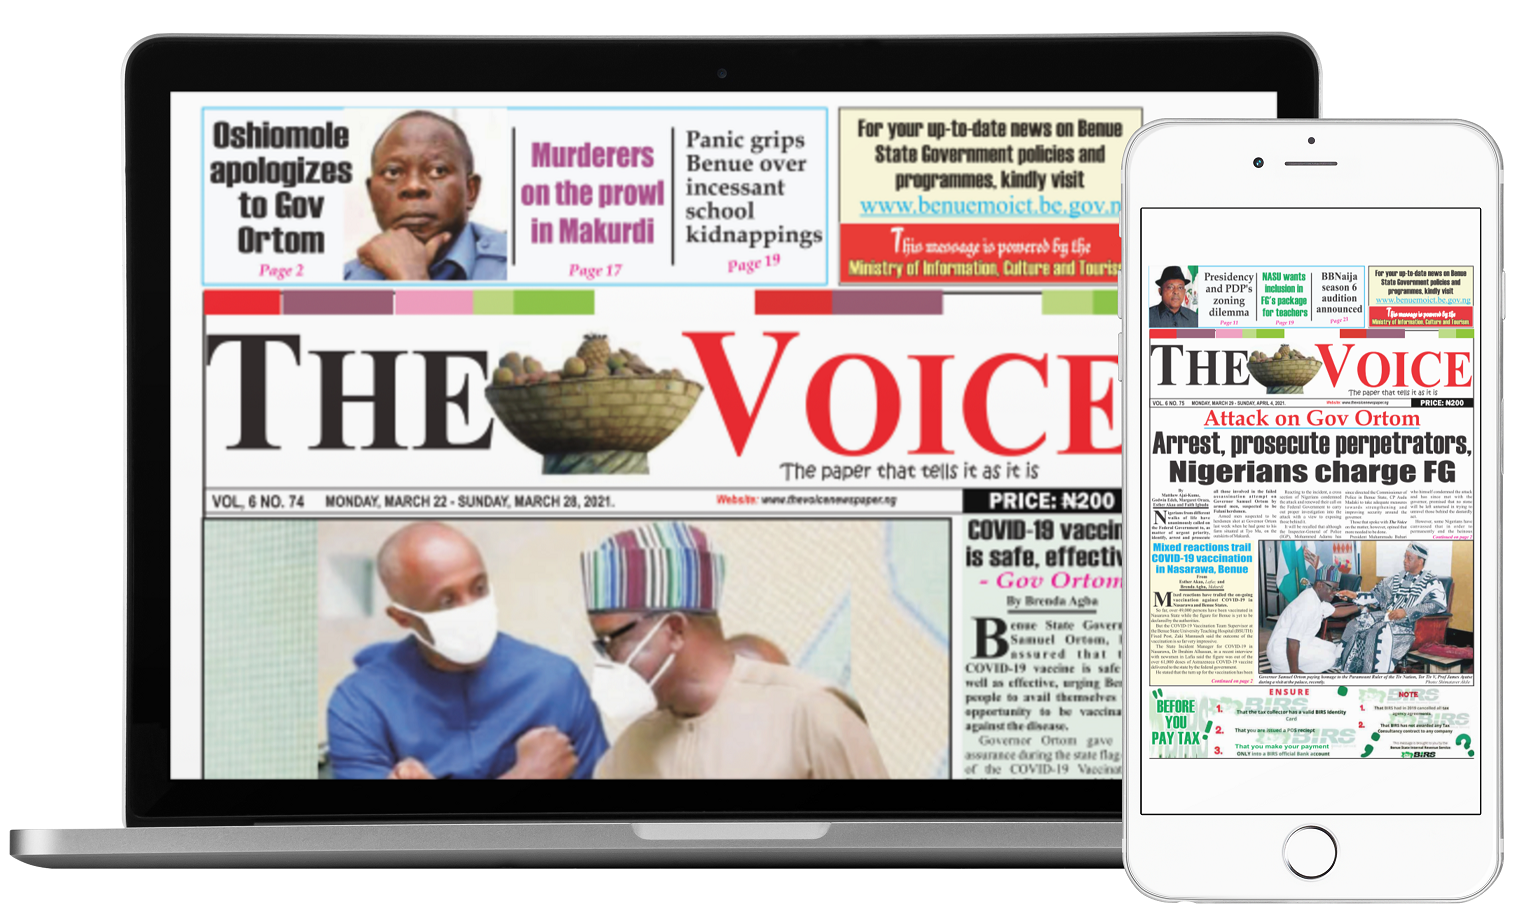  THE VOICE NEWSPAPER